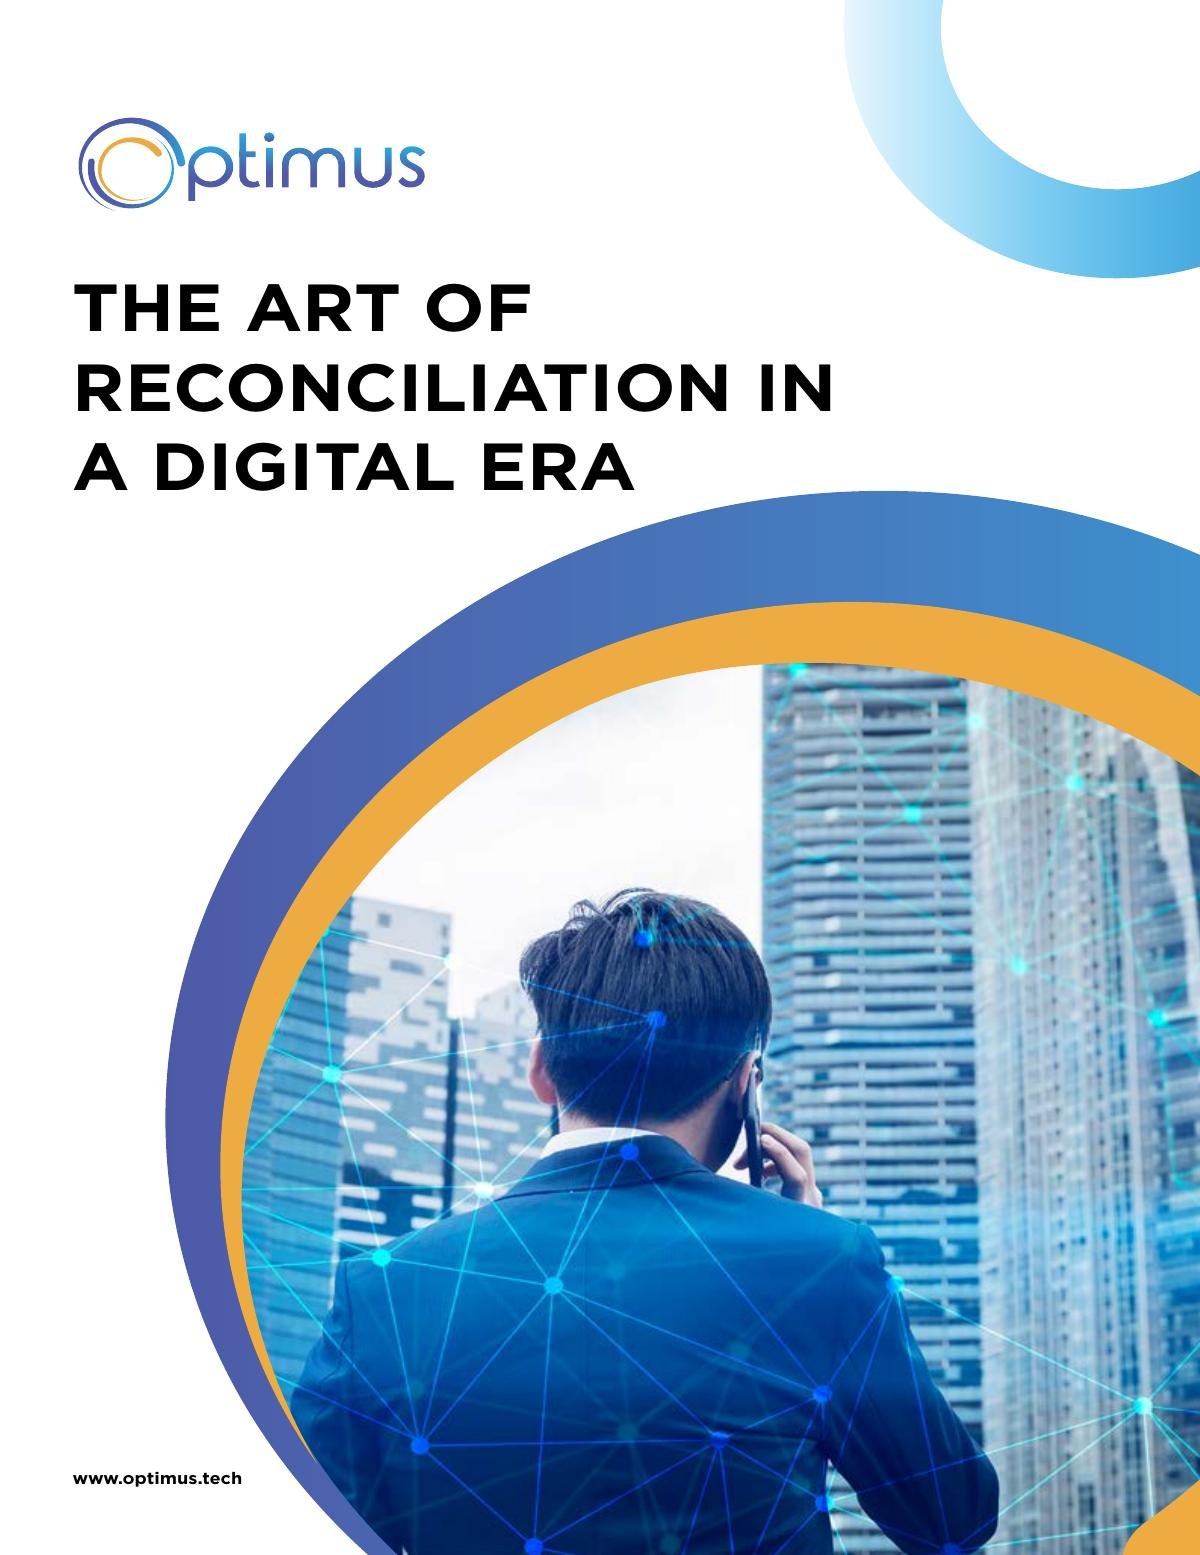 The Art of Reconciliation in the Digital Era